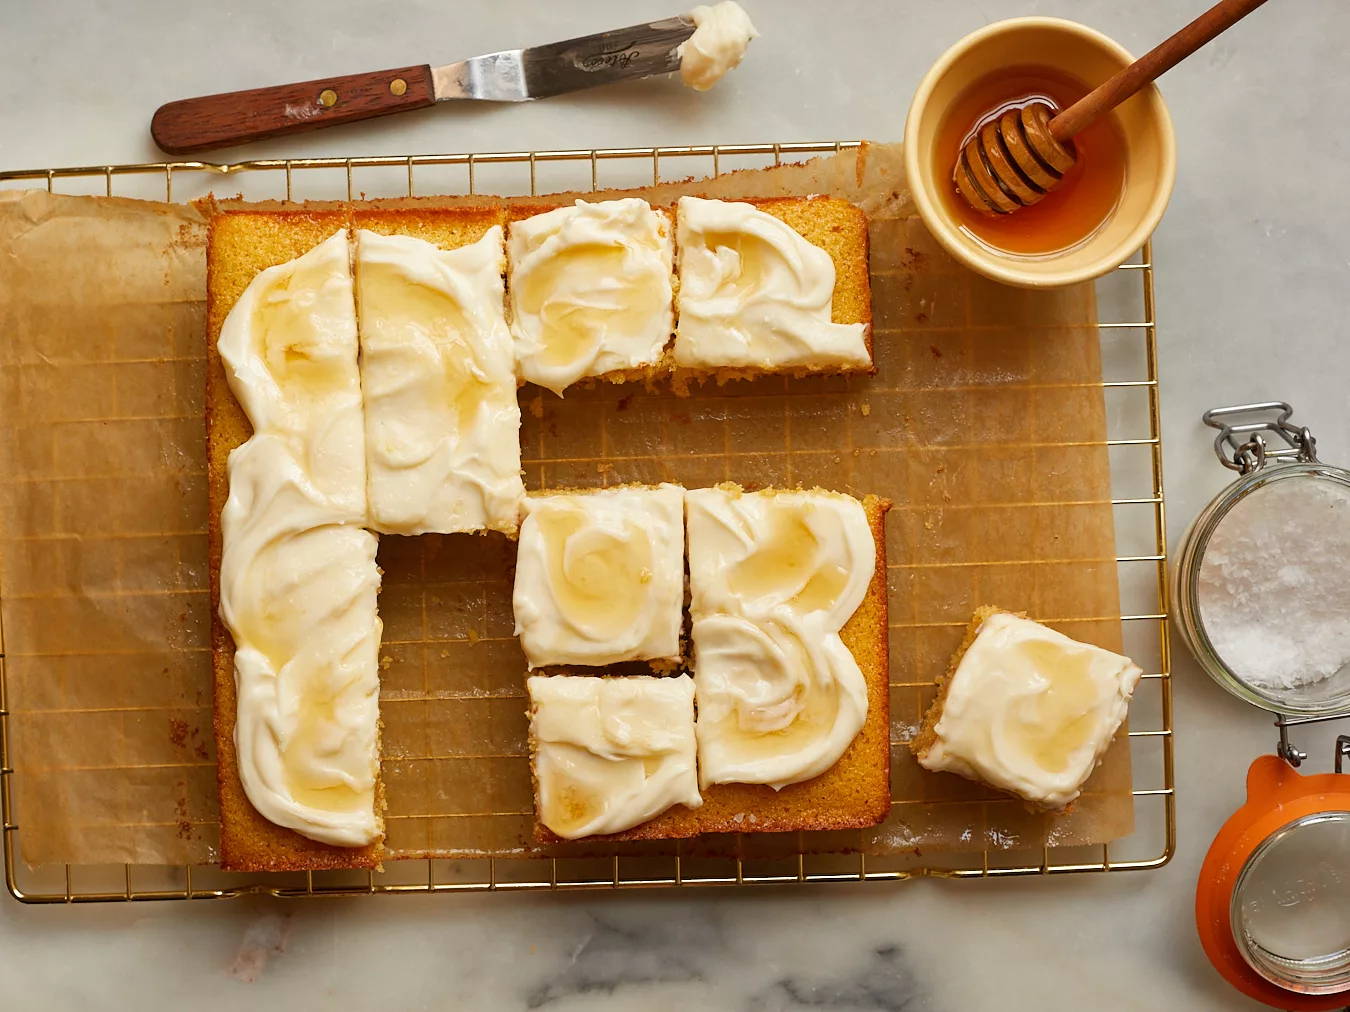 cornbread snacking cake cut into slices on a wire rack surrounded by honey, a jar of flakey salt, and a spatula with cream cheese frosting on it